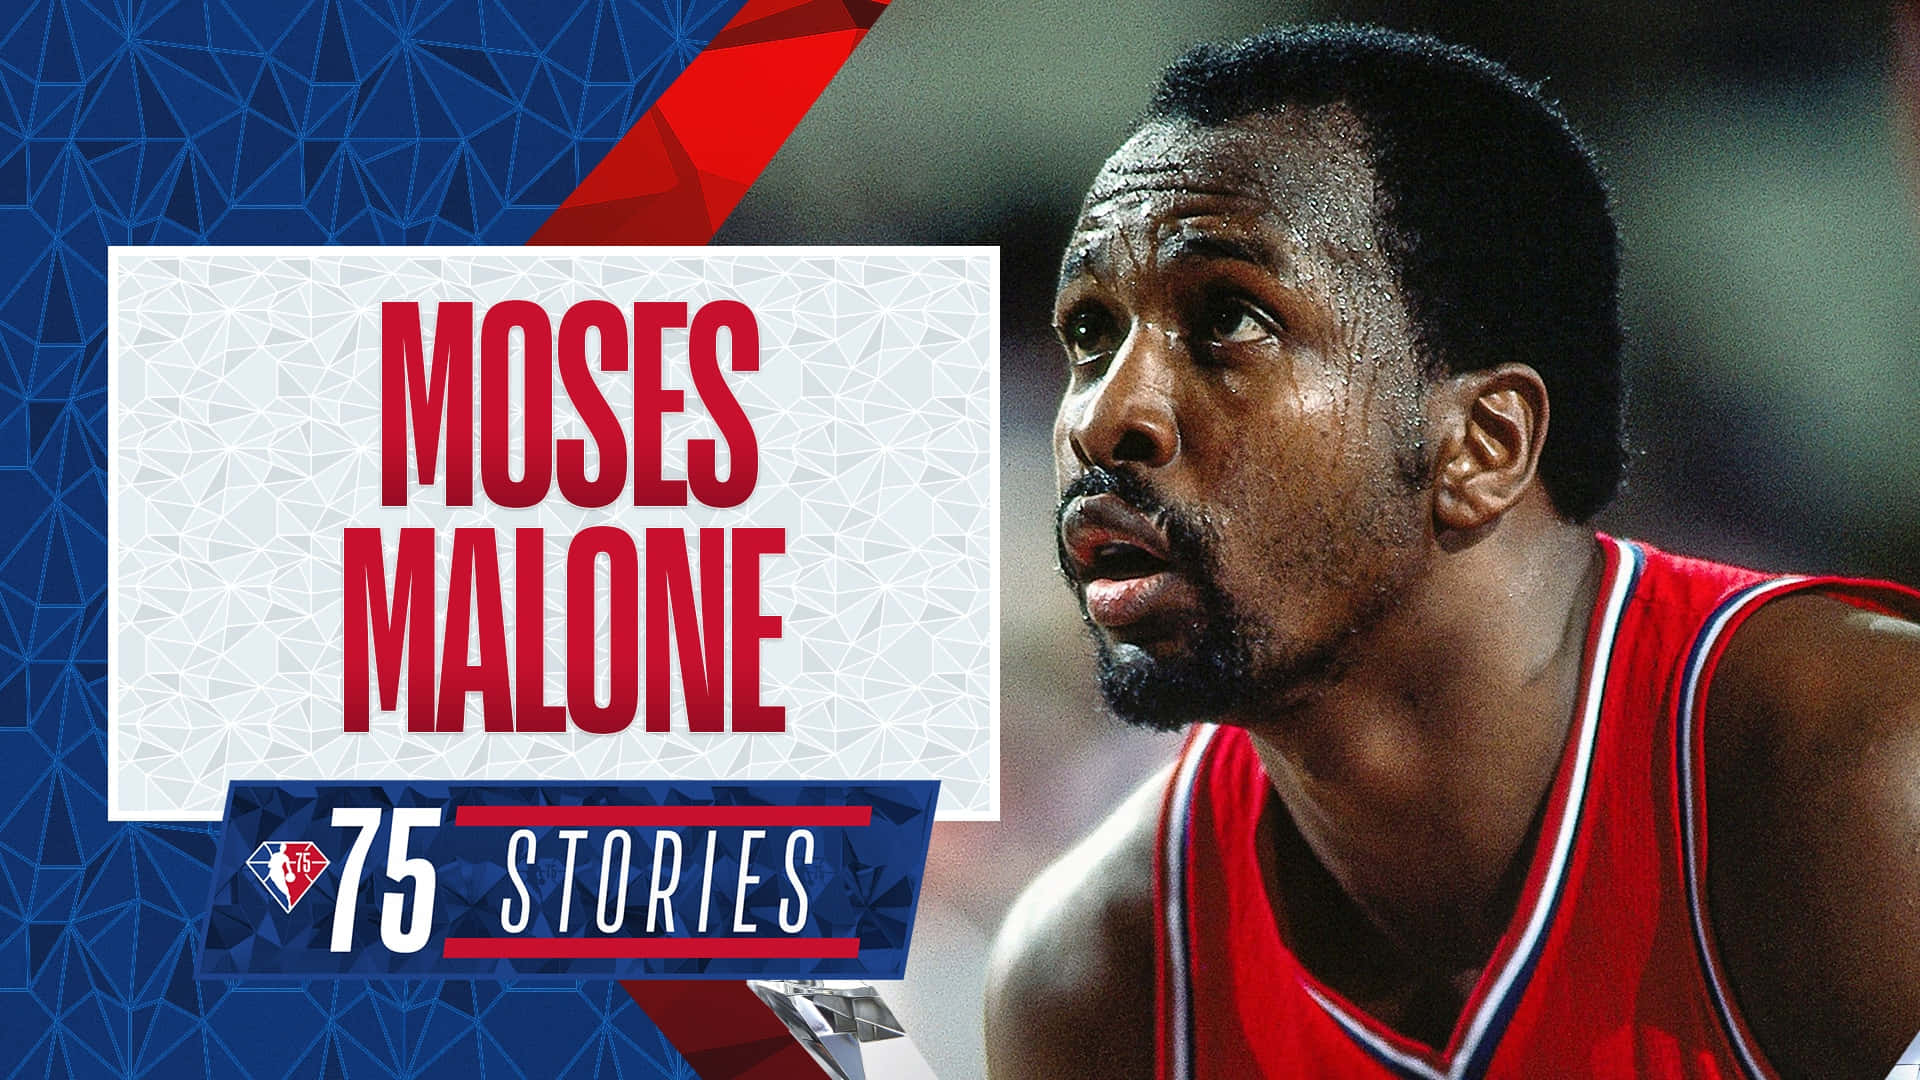 Moses Malone 75 Historier Wallpaper